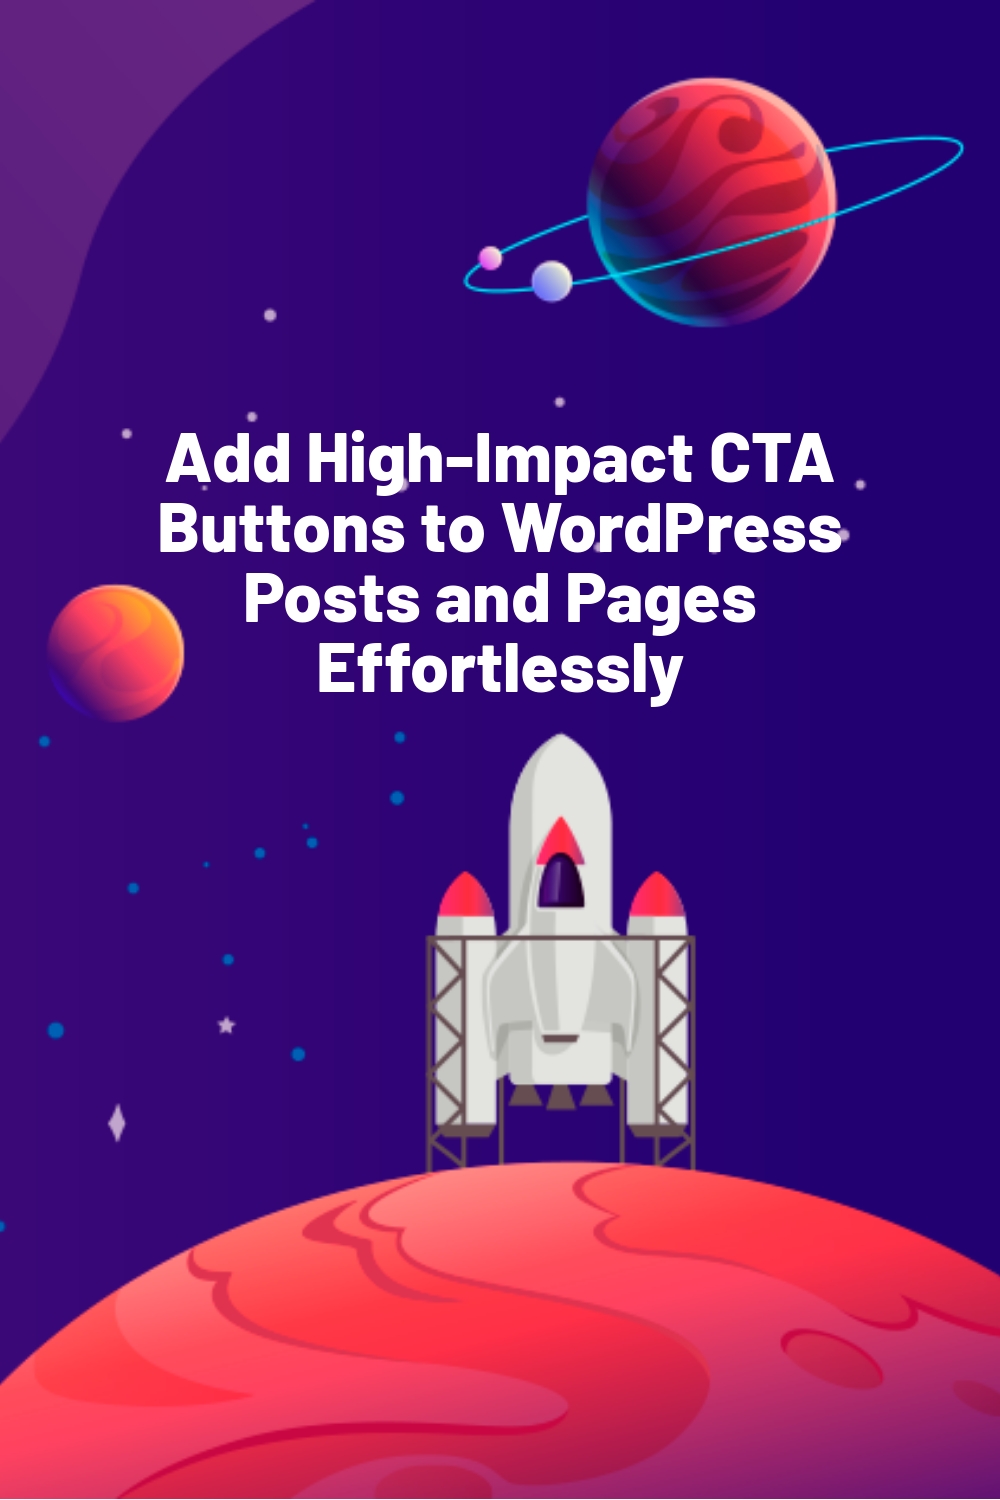 Add High-Impact CTA Buttons to WordPress Posts and Pages Effortlessly